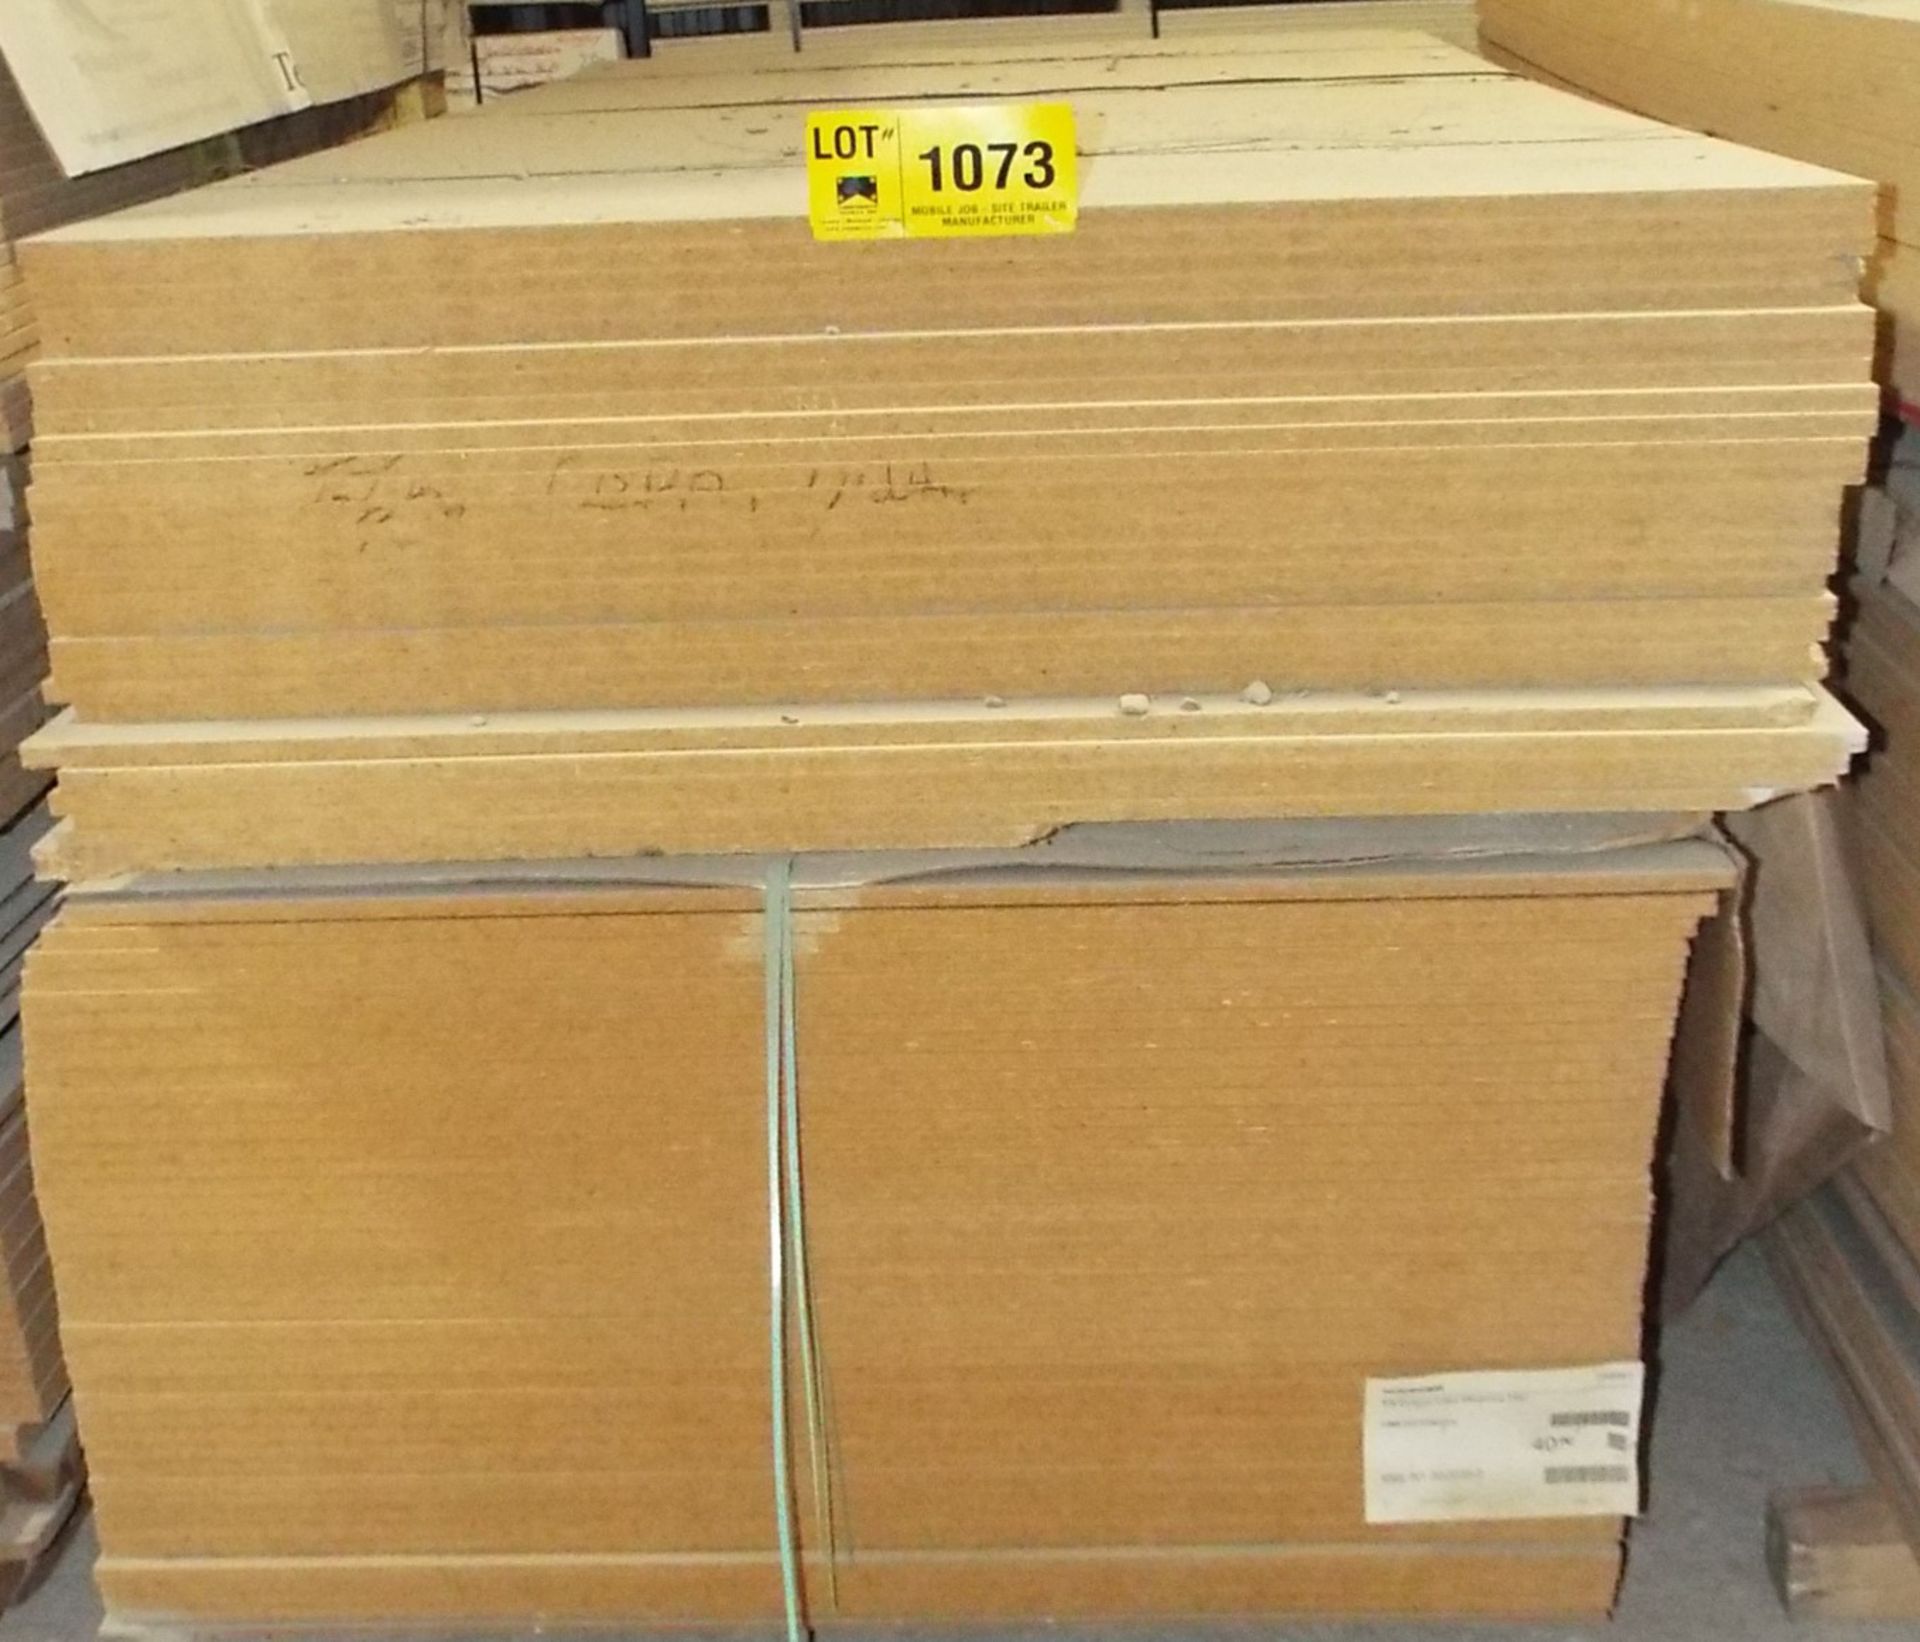 LOT/ PARTICLE BOARD